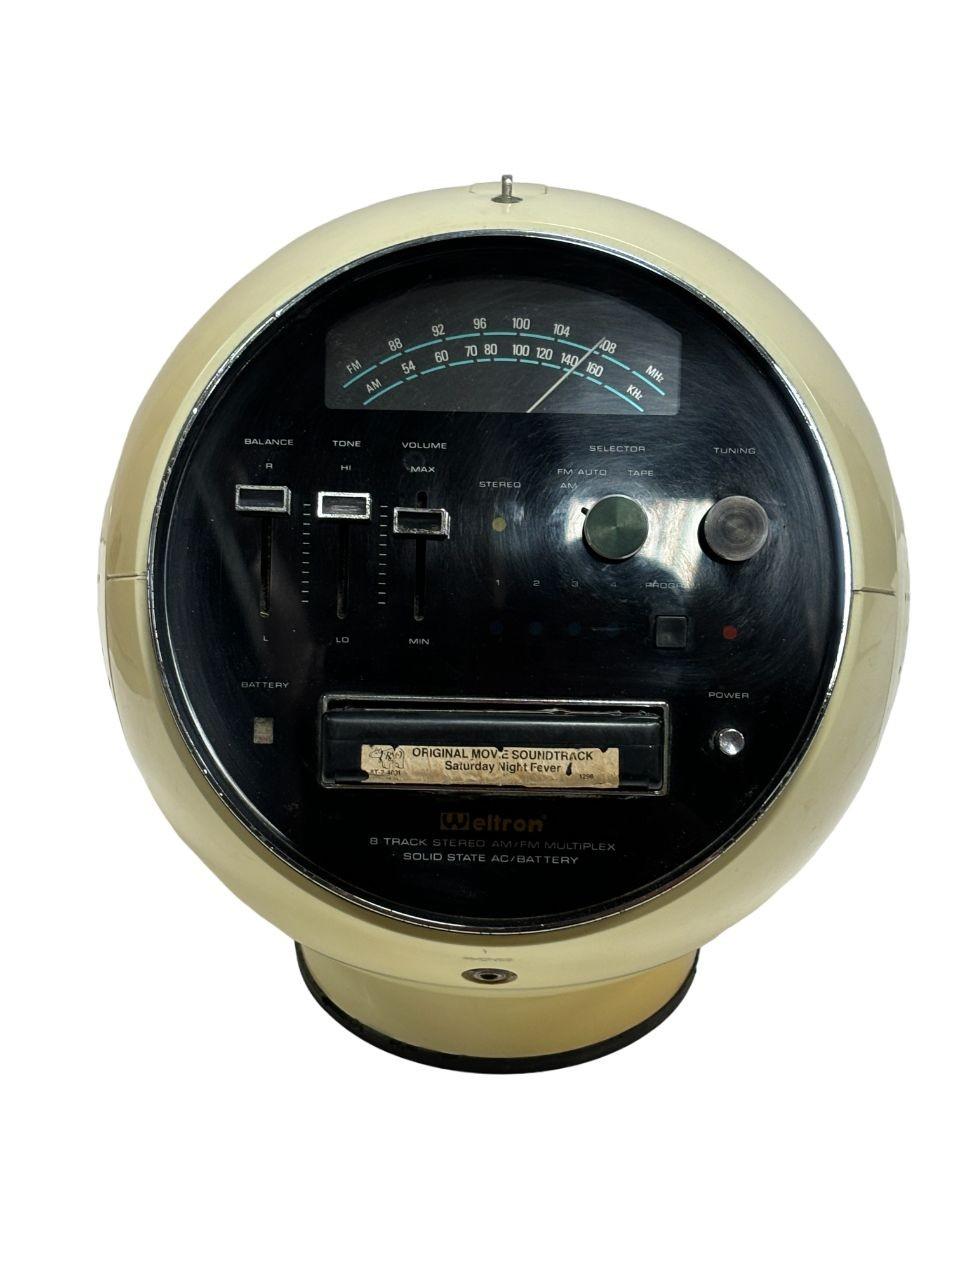 Introducing the Weltron Model, a fully functioning ultra-modern space ball AM/FM stereo with an integrated 8-track player. This rare audio gem from the iconic Weltron brand boasts cutting-edge technology and a sleek design that stands out in any